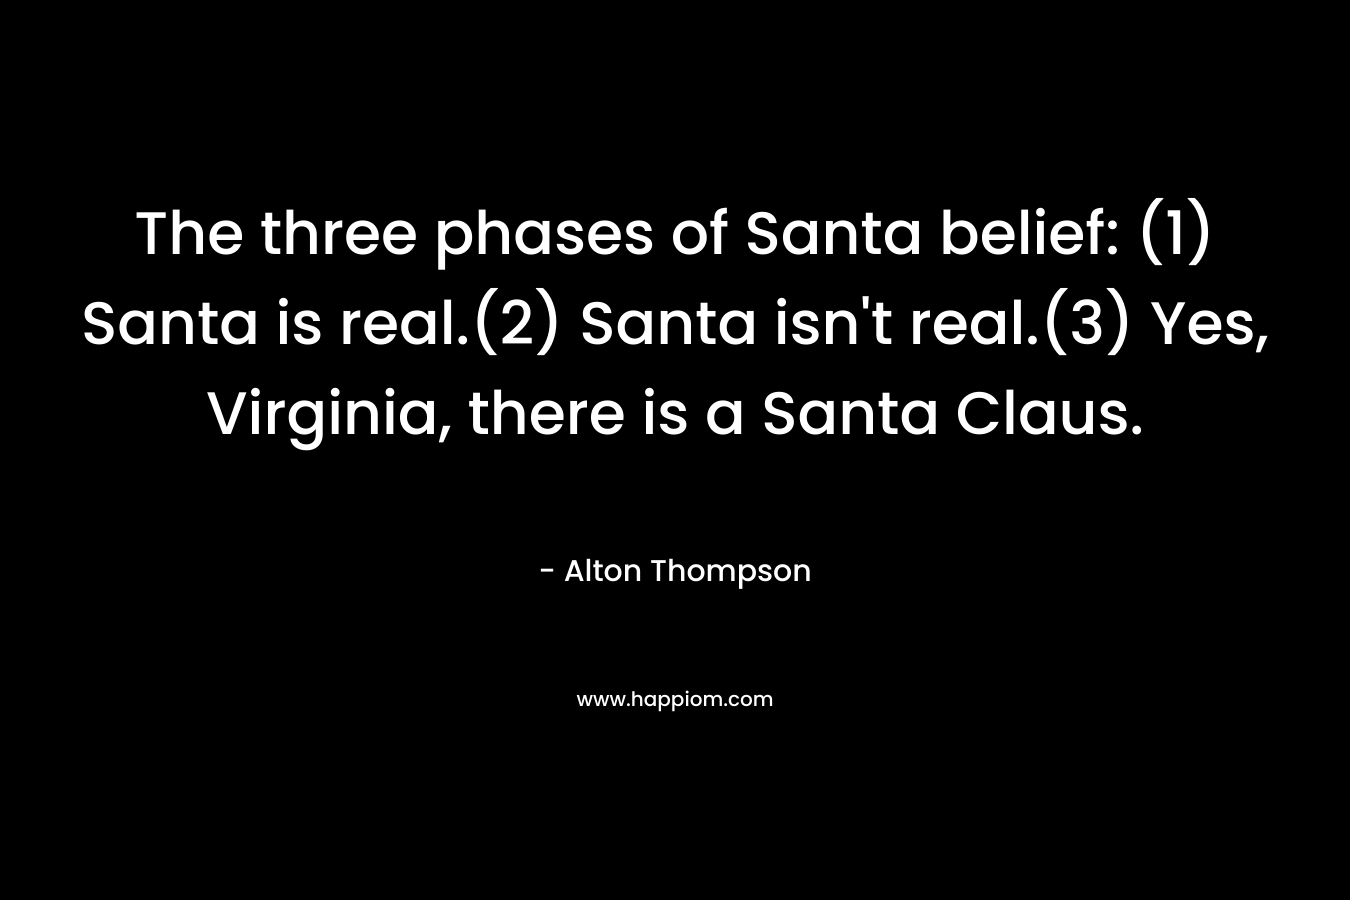 The three phases of Santa belief: (1) Santa is real.(2) Santa isn’t real.(3) Yes, Virginia, there is a Santa Claus. – Alton Thompson